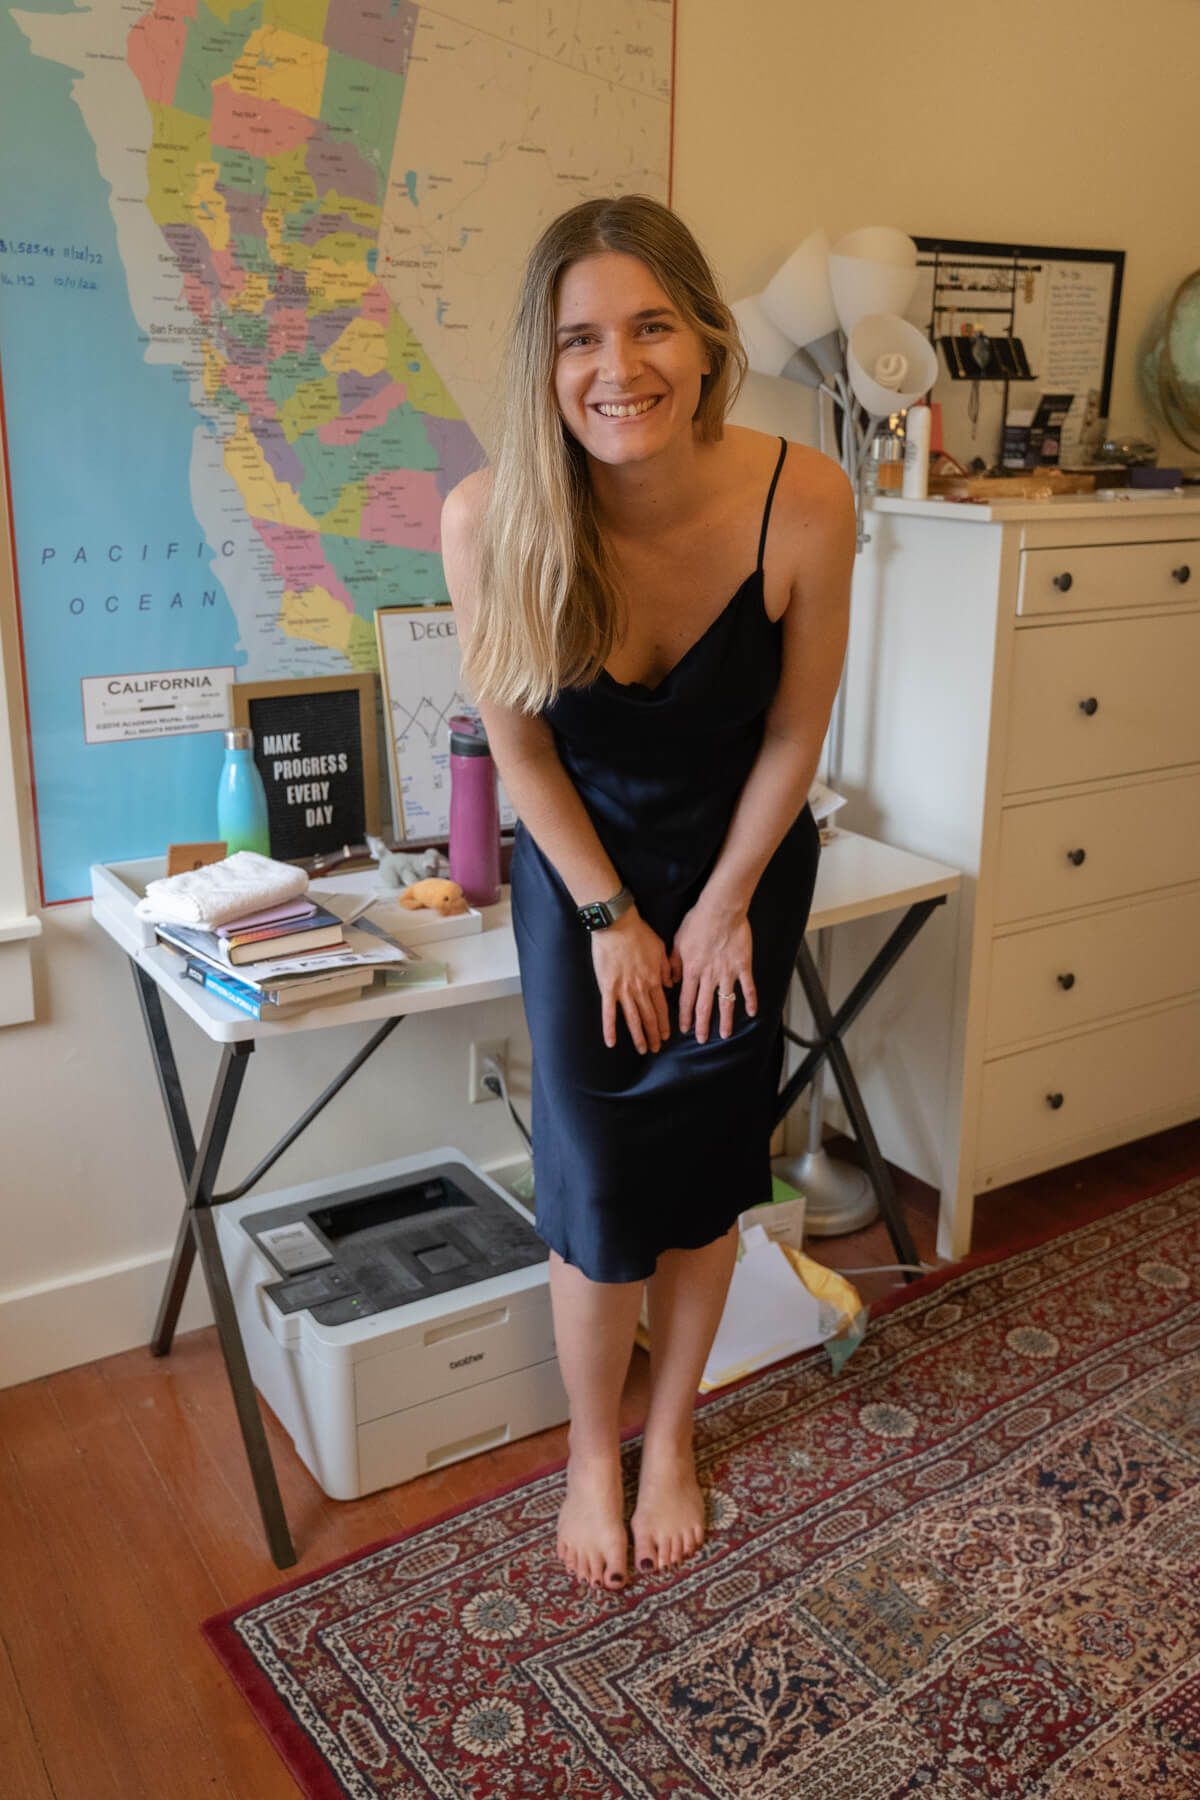 A young woman wearing a dark blue Silk Slip Dress smiles and leans forward with her hands on her knees in an interior setting with a map of California on the wall behind her.